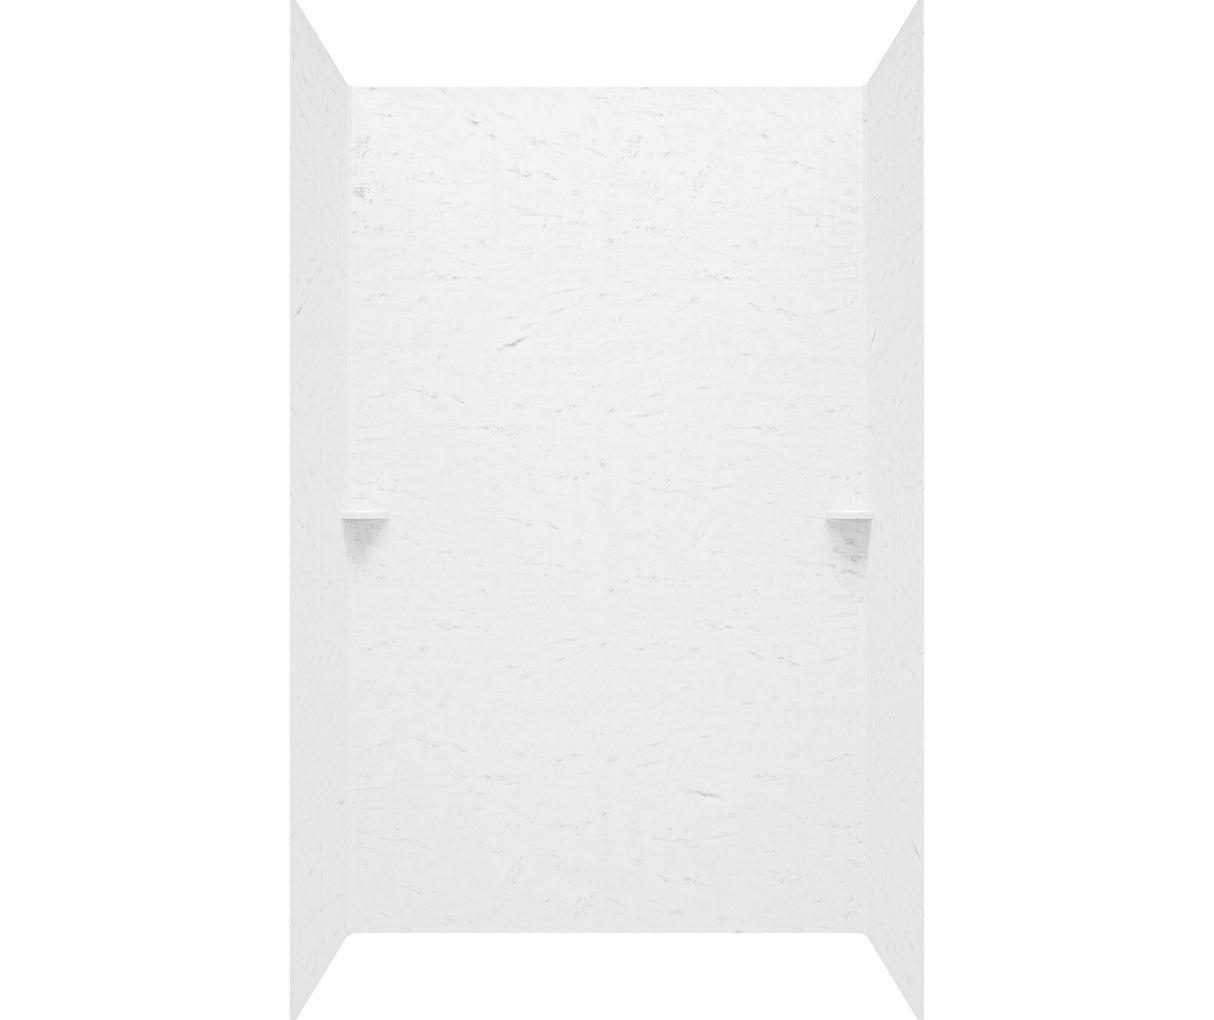 Swanstone SK-484896 48 x 48 x 96 Swanstone Smooth Glue up Shower Wall Kit in Carrara SK484896.221